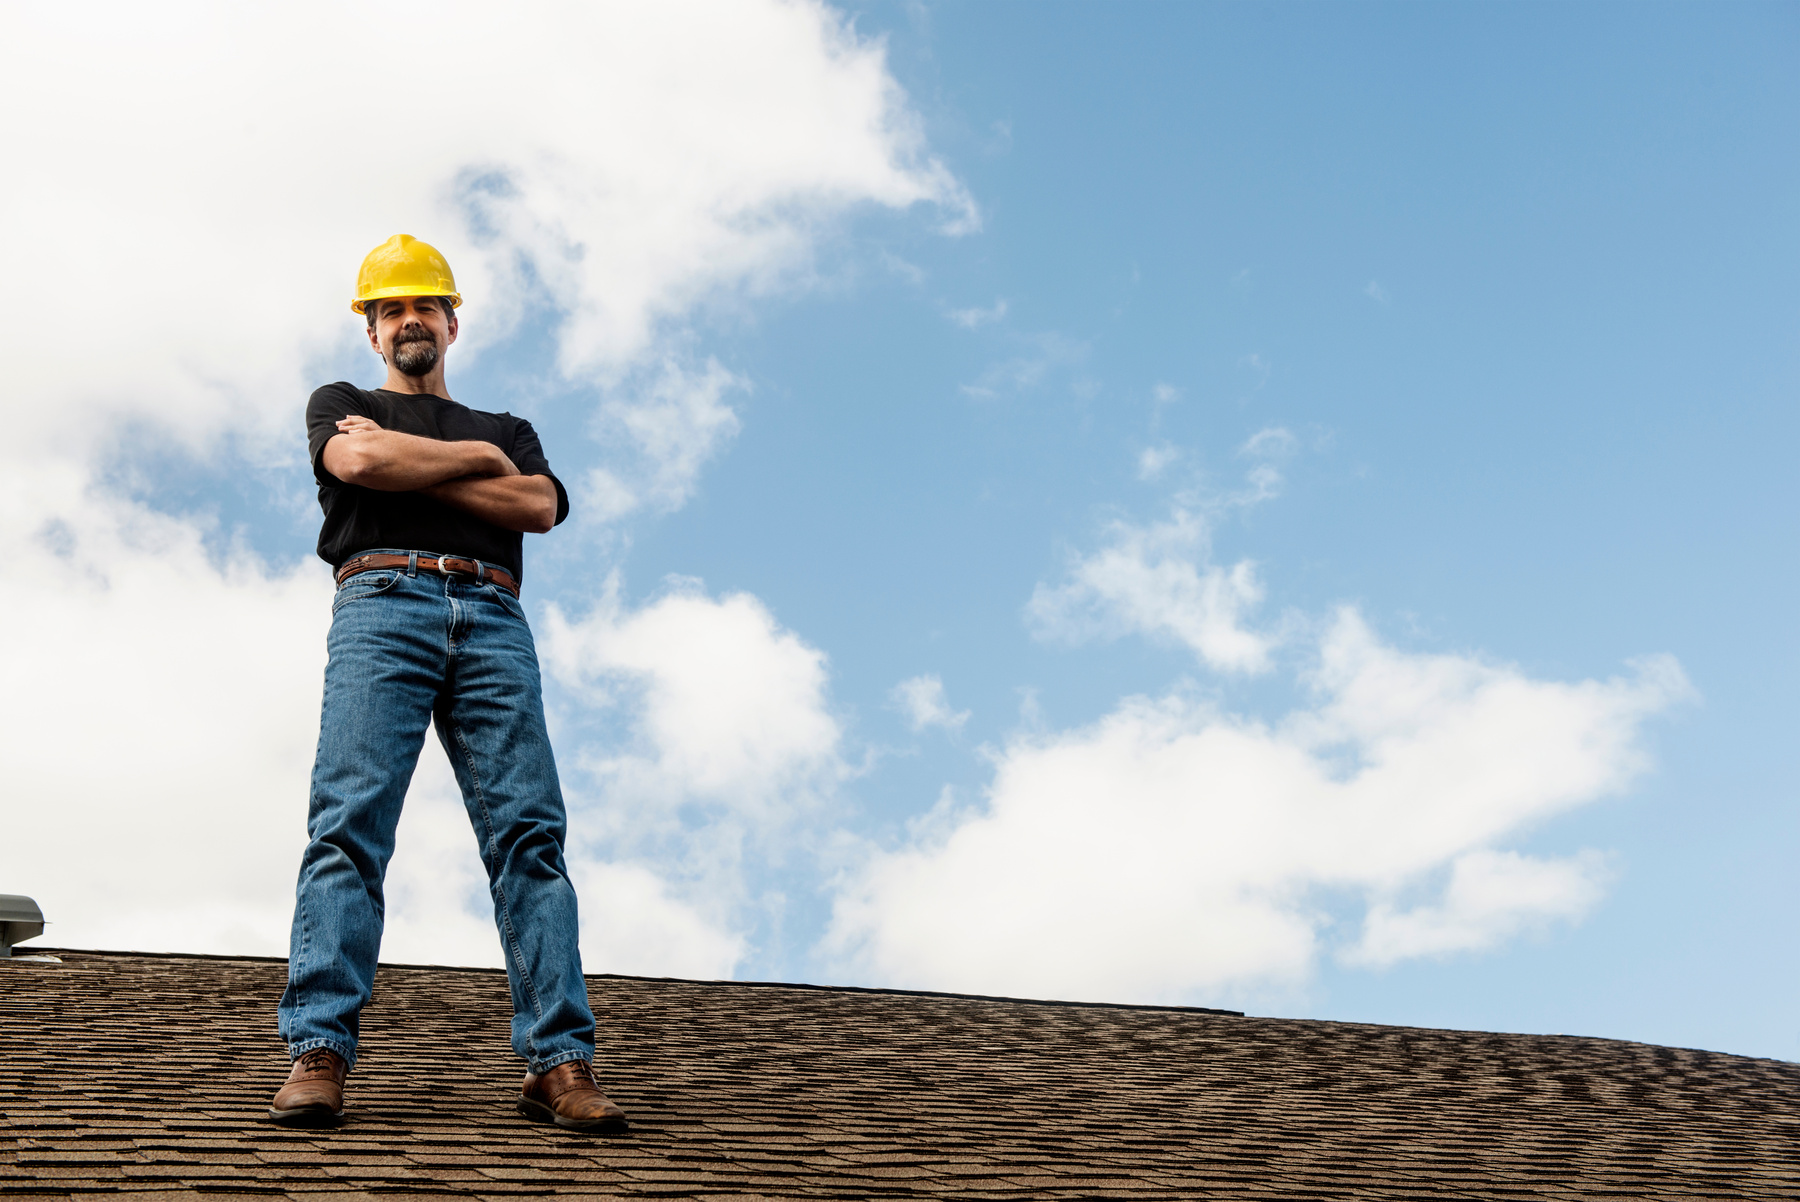 American Roofing Contractor Standing on Home Roof